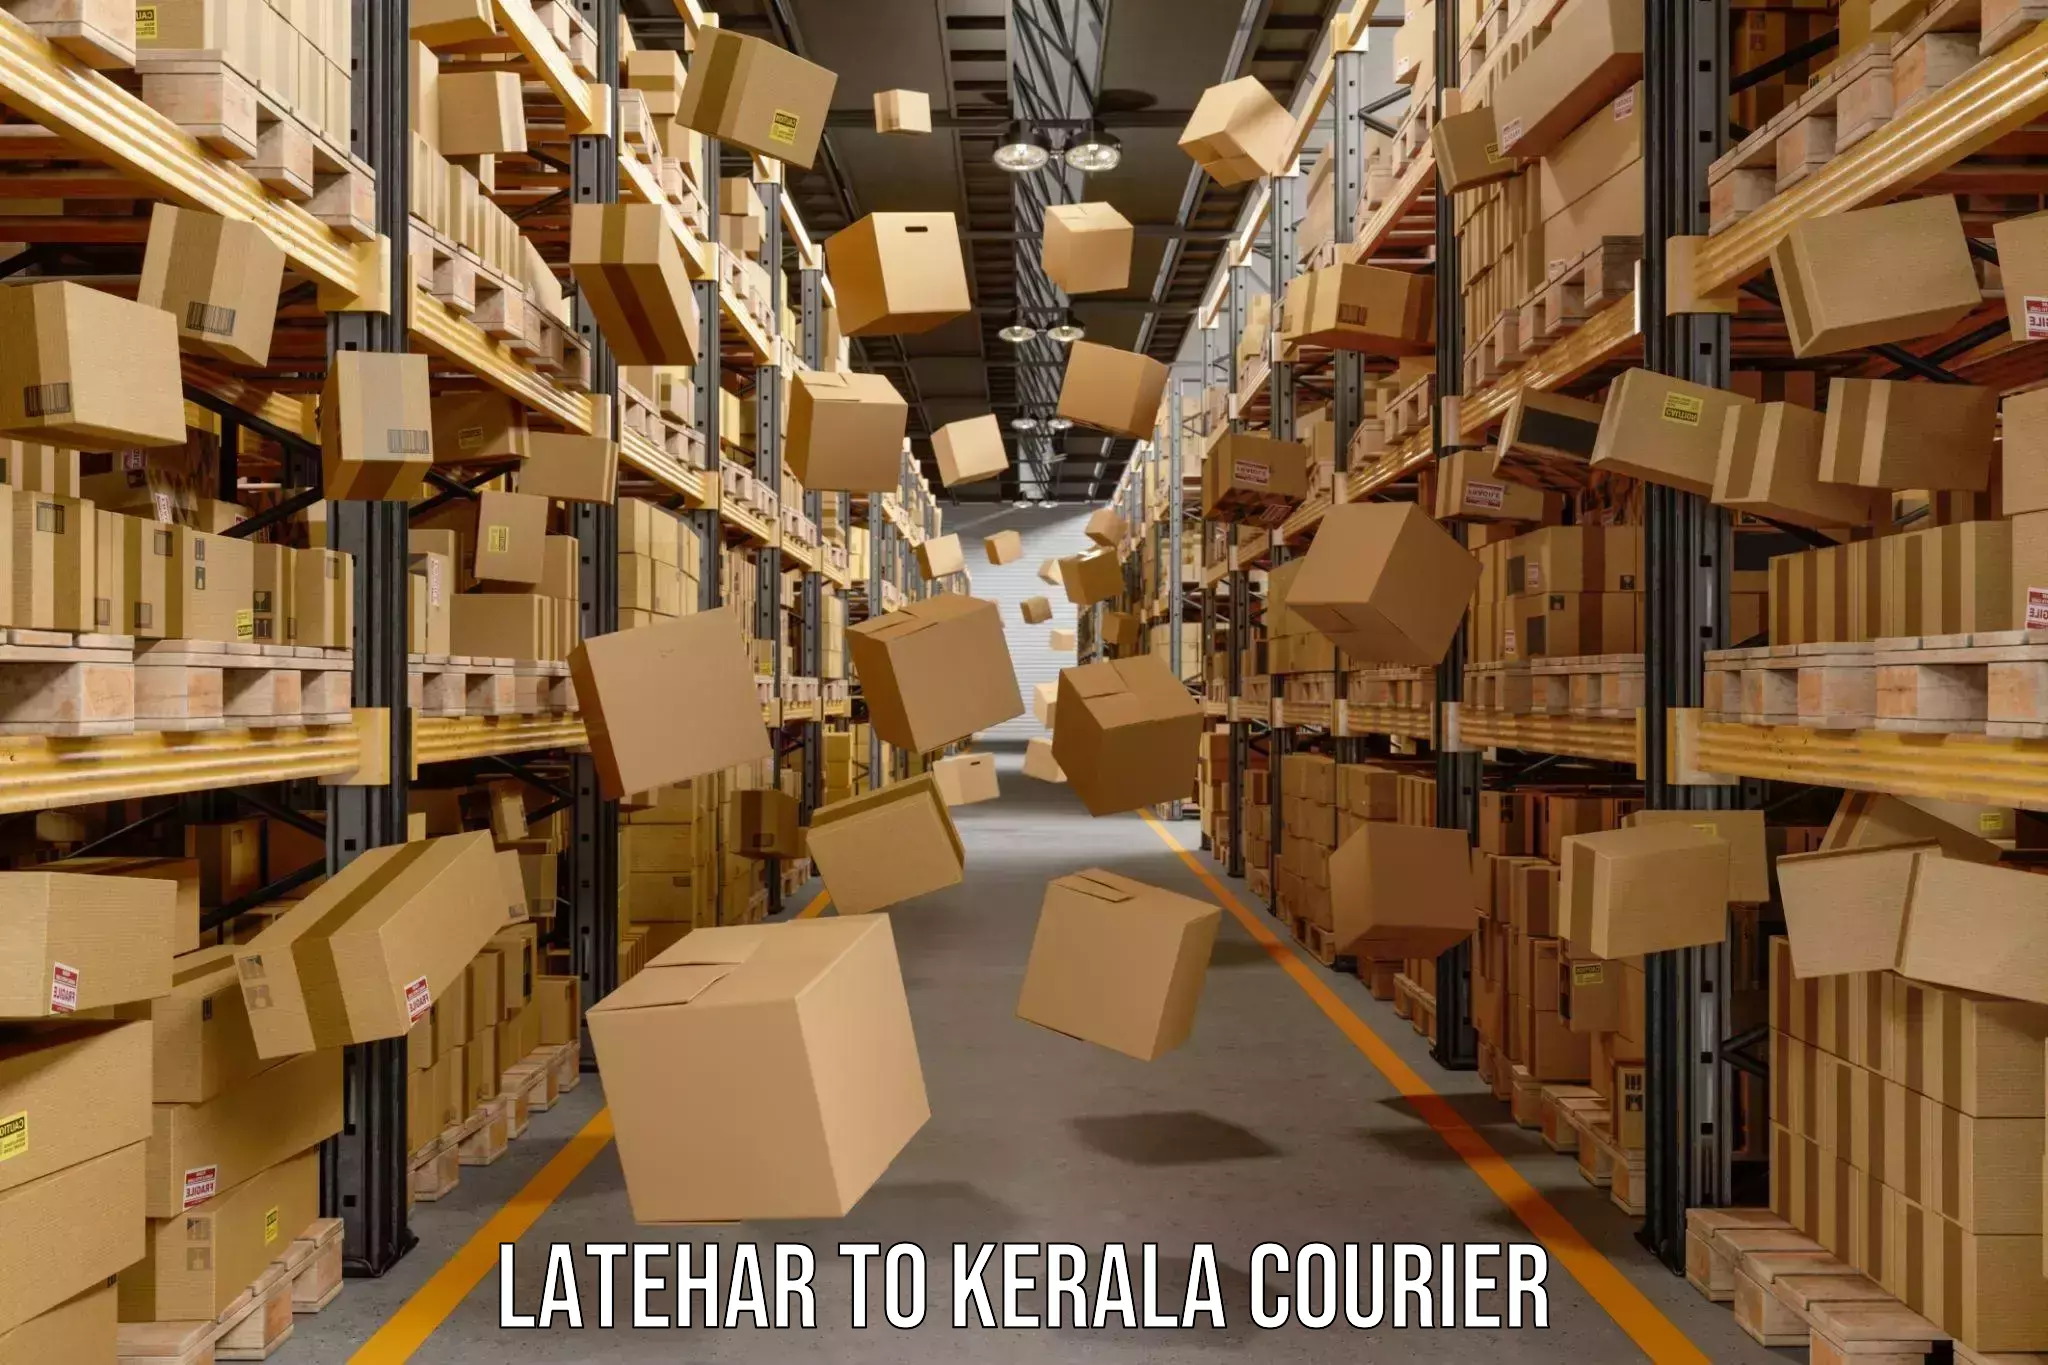 On-call courier service Latehar to Anjumoorthy